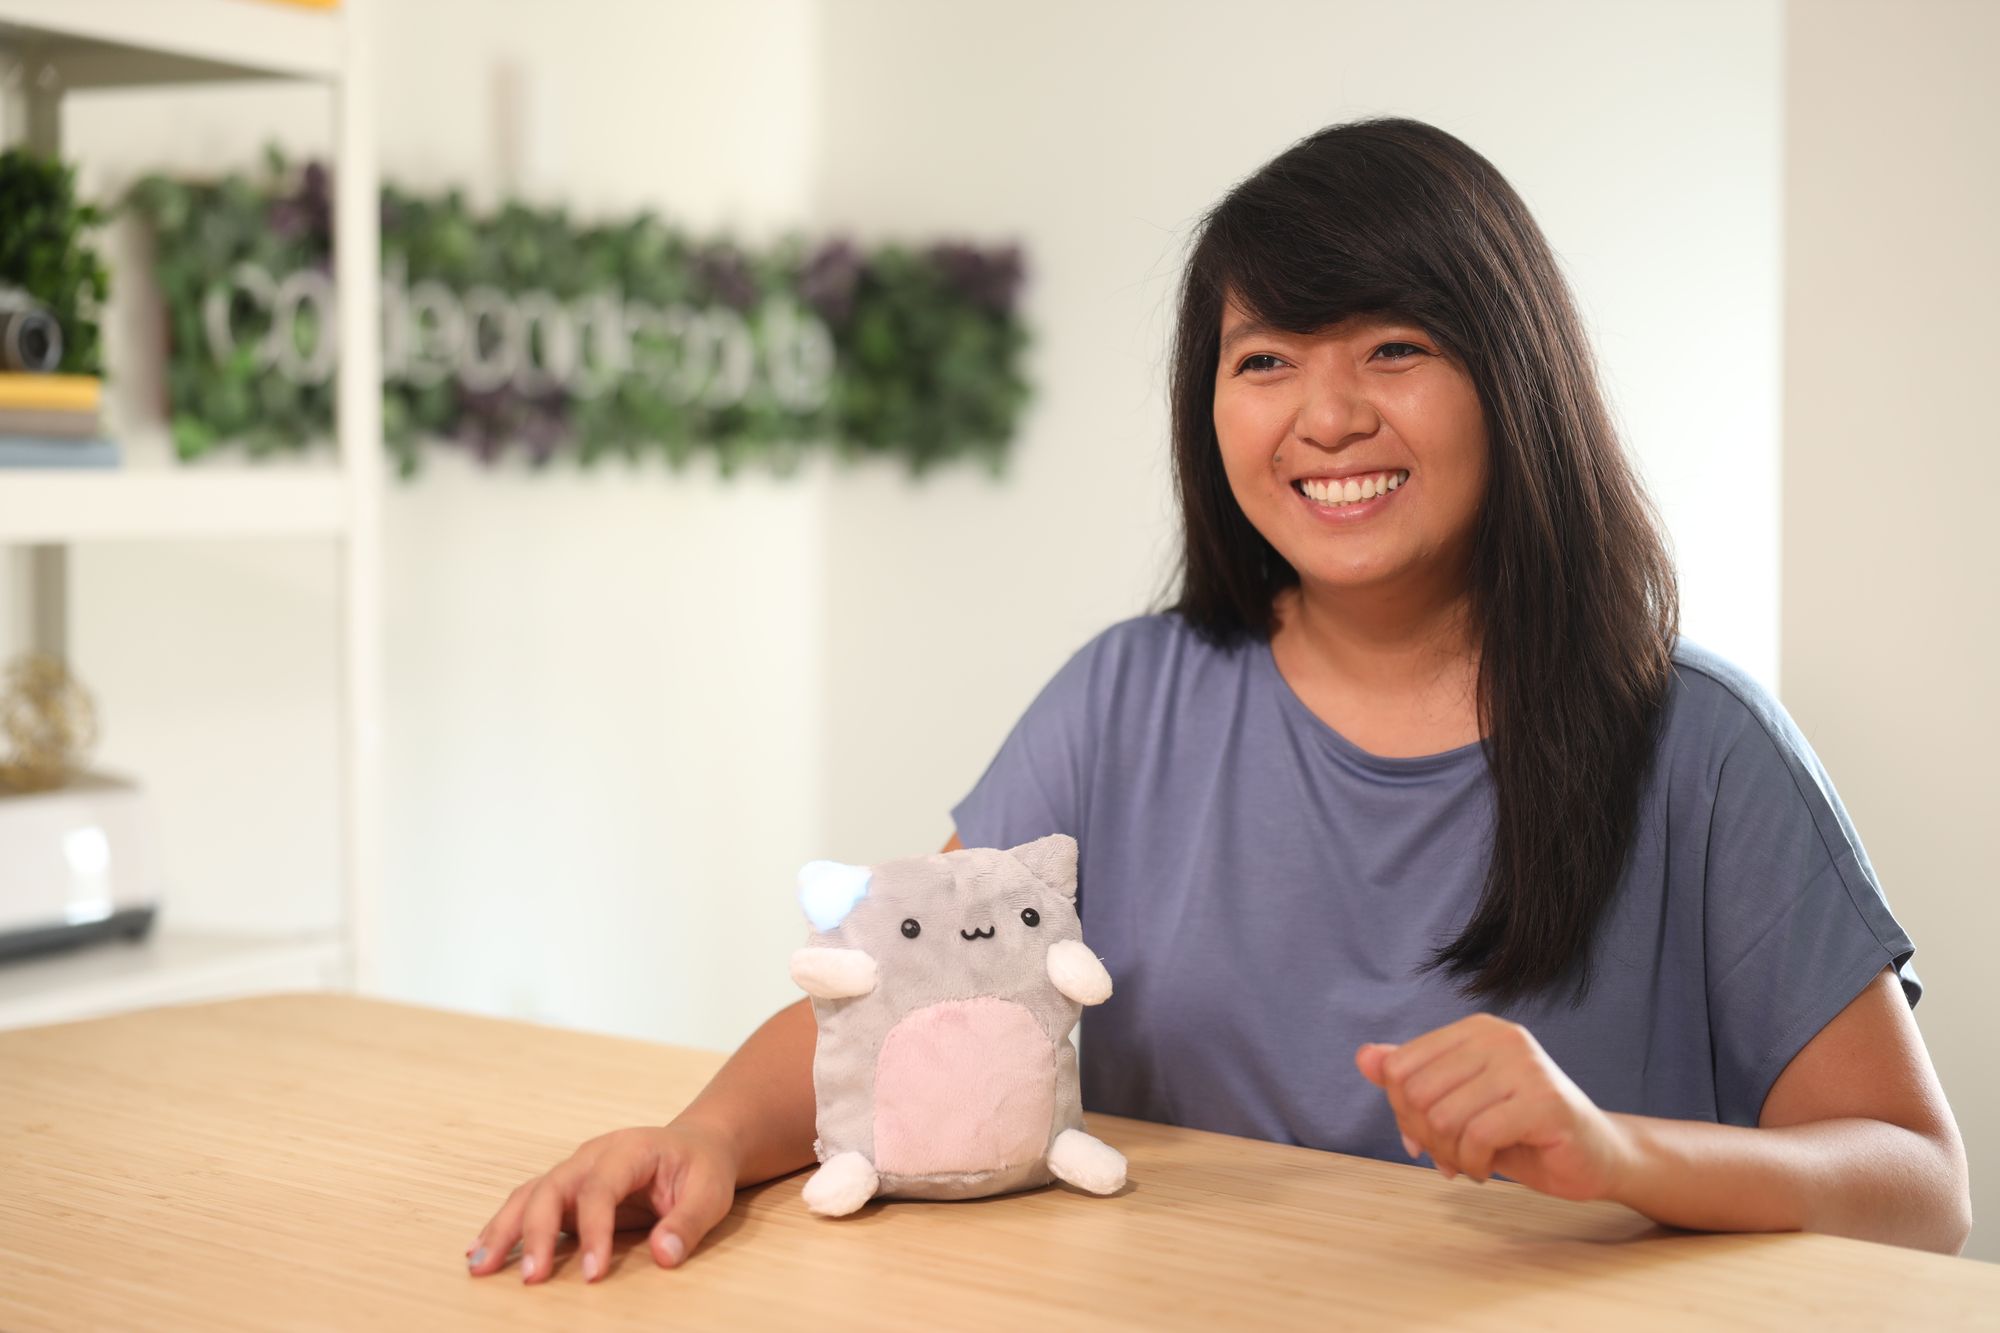 How to make an internet-connected soft robot cat: A video course on LinkedIn Learning